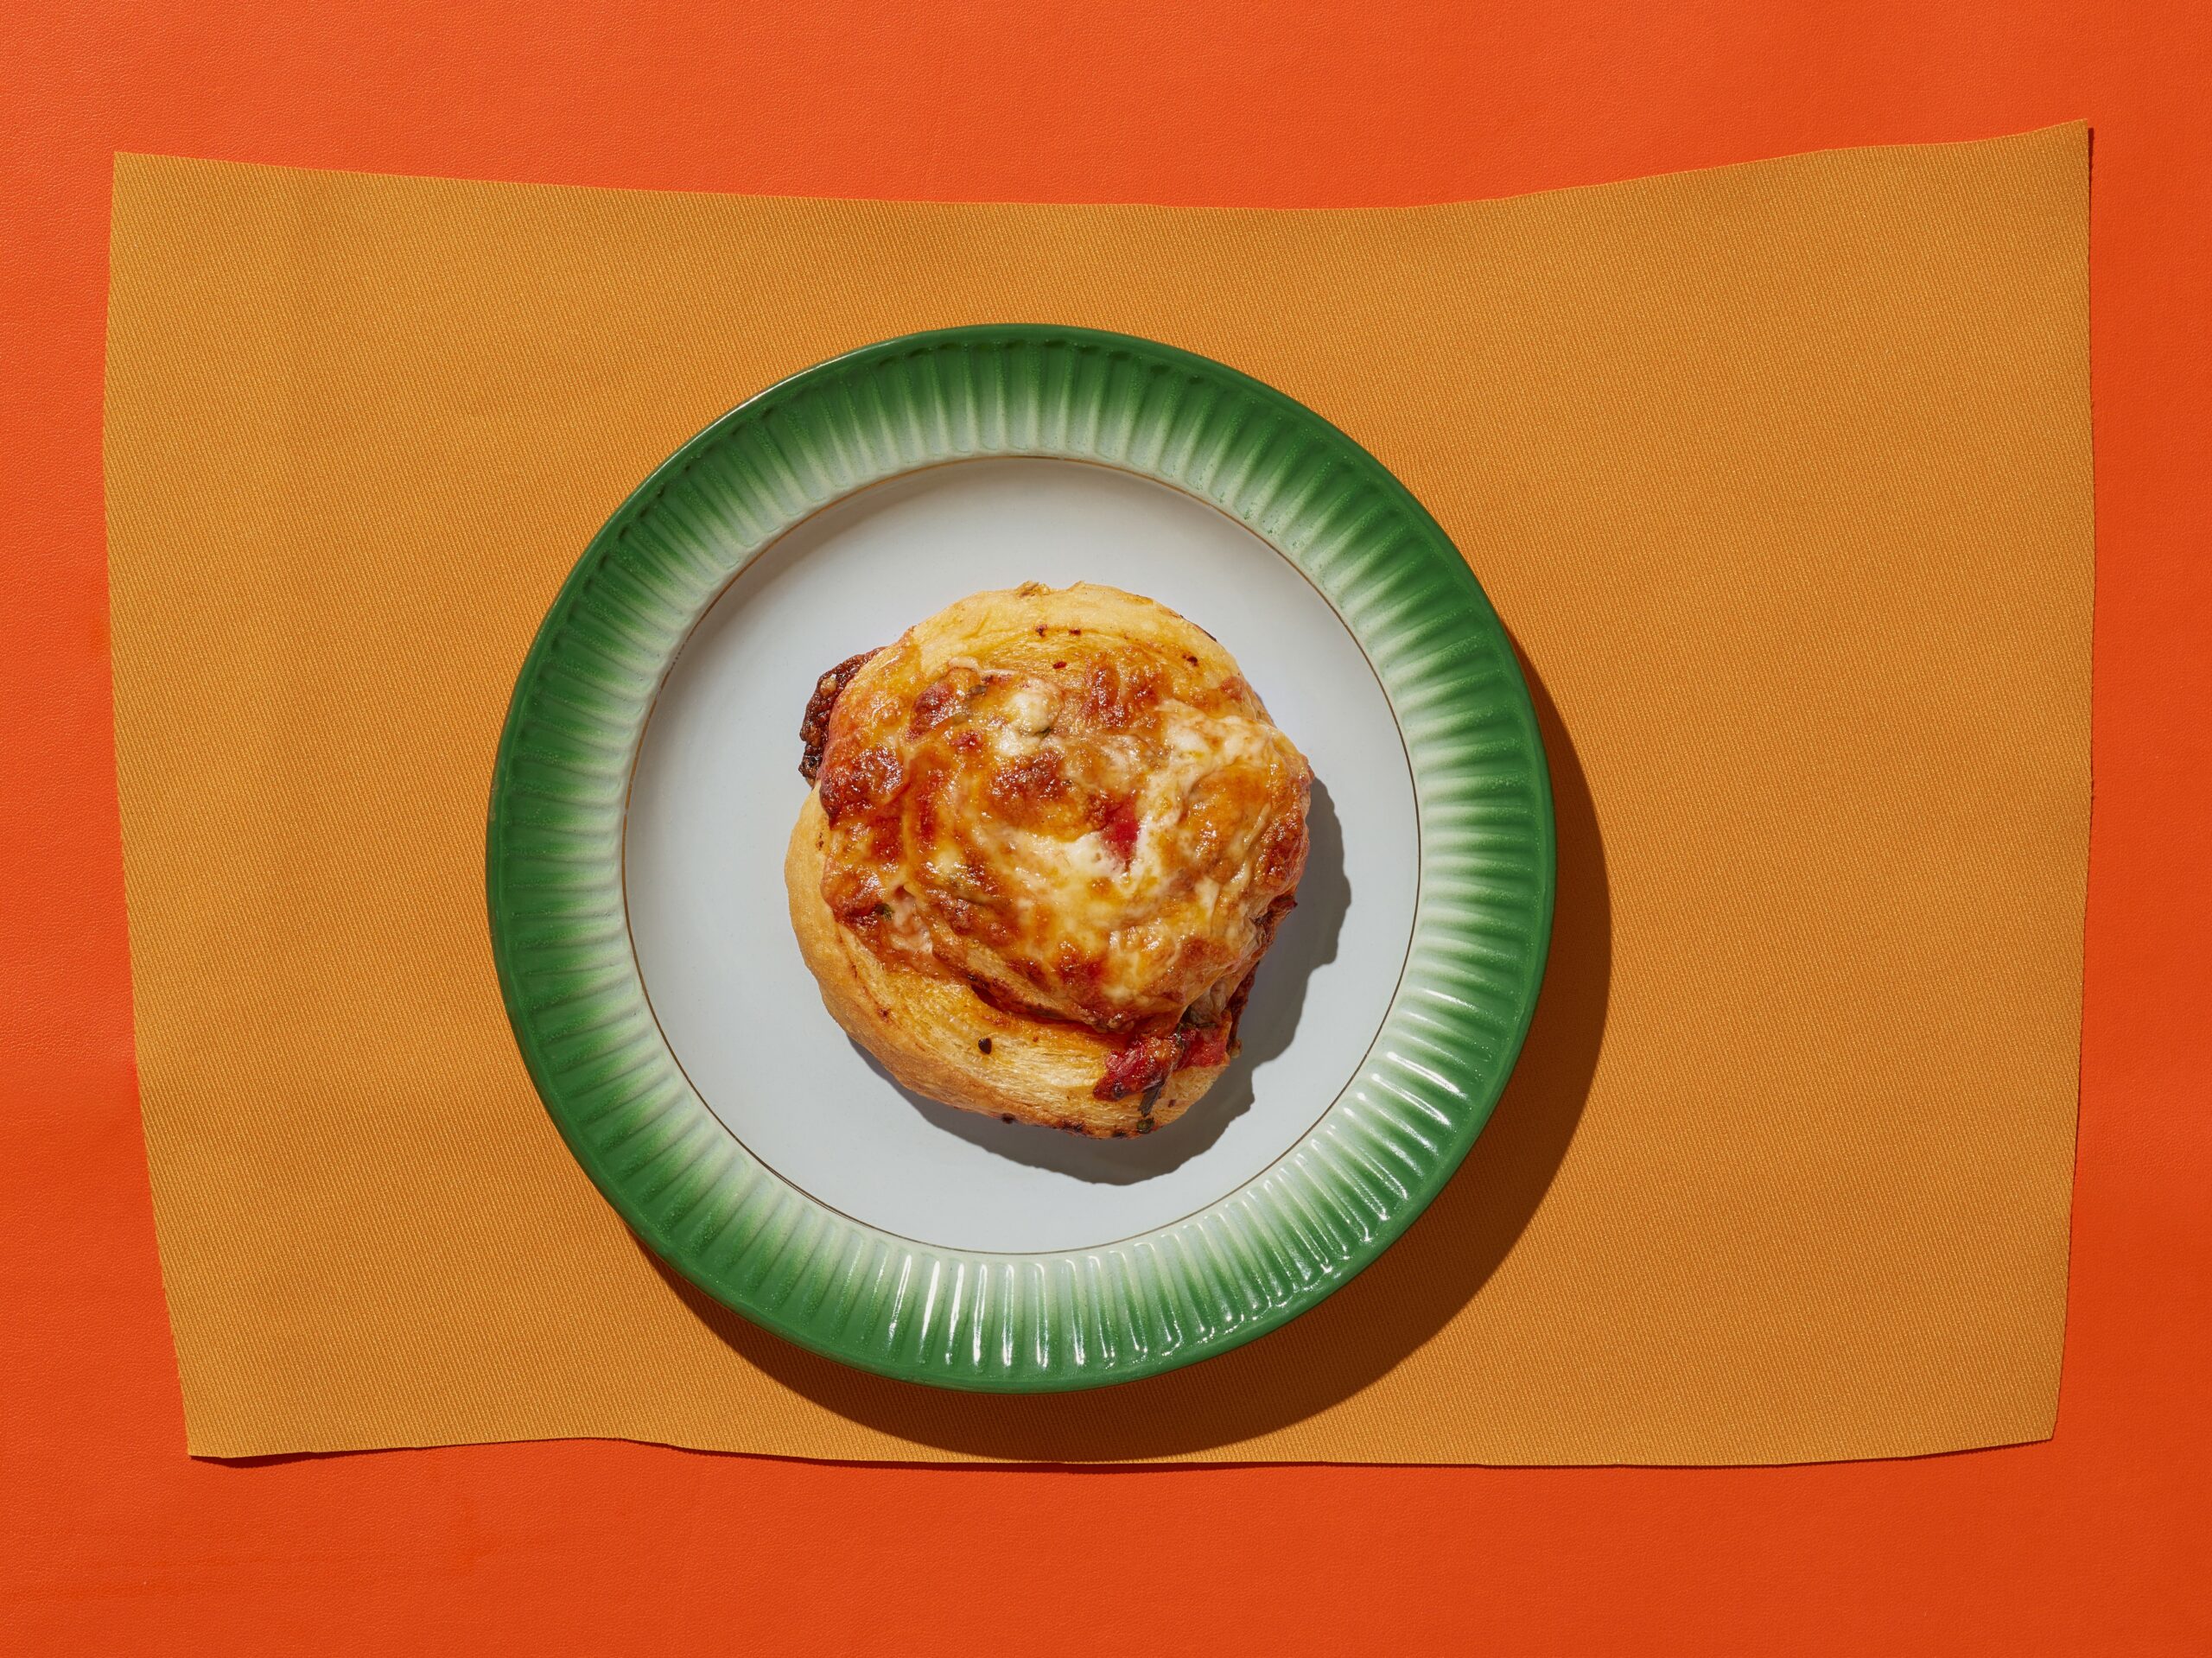 Pizza bourekas on a green and white plate atop orange background